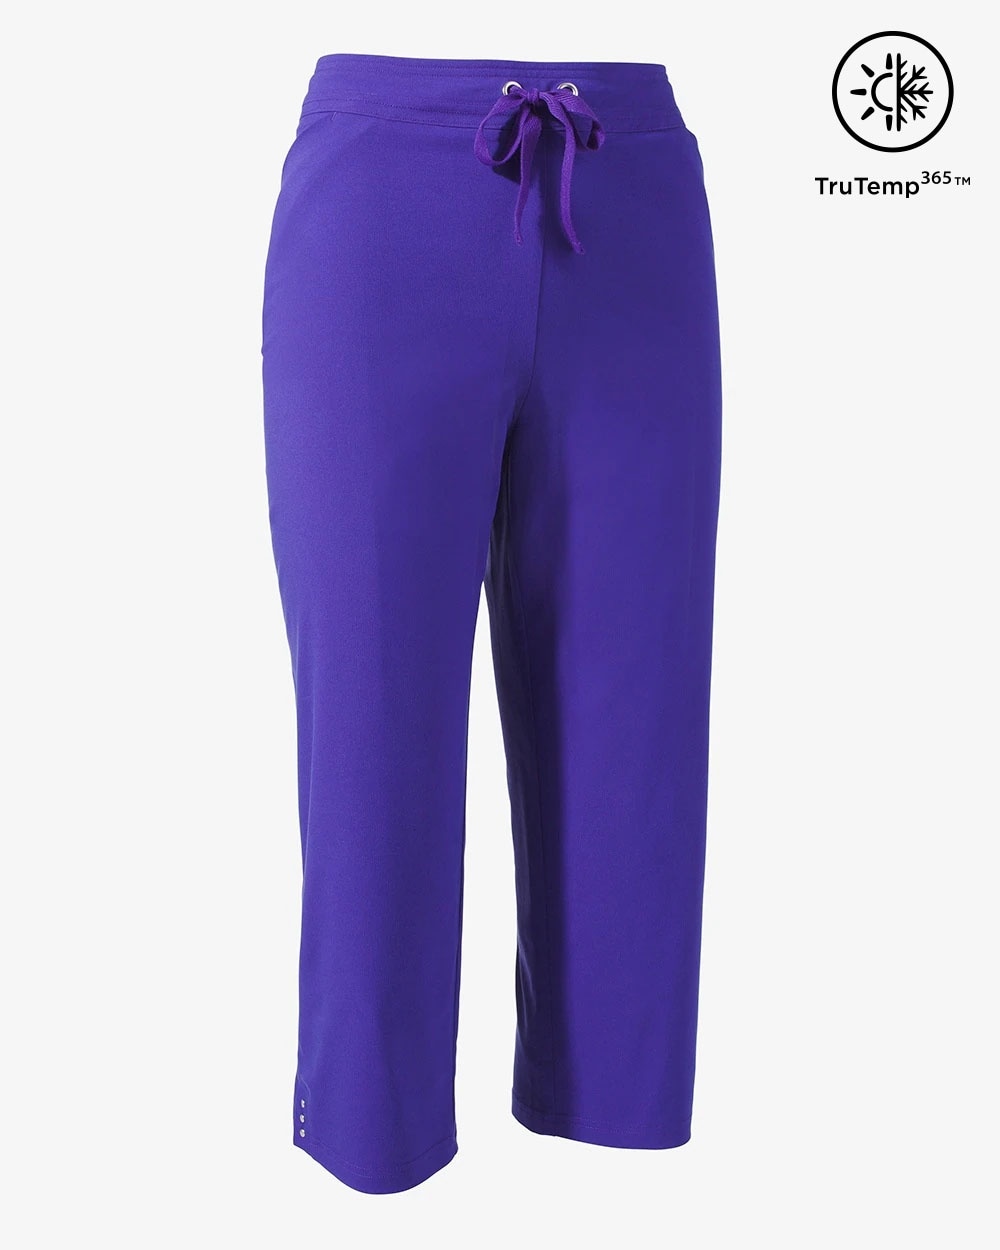 Weekends Perfect Stretch TruTemp 365 Pull-On Capris